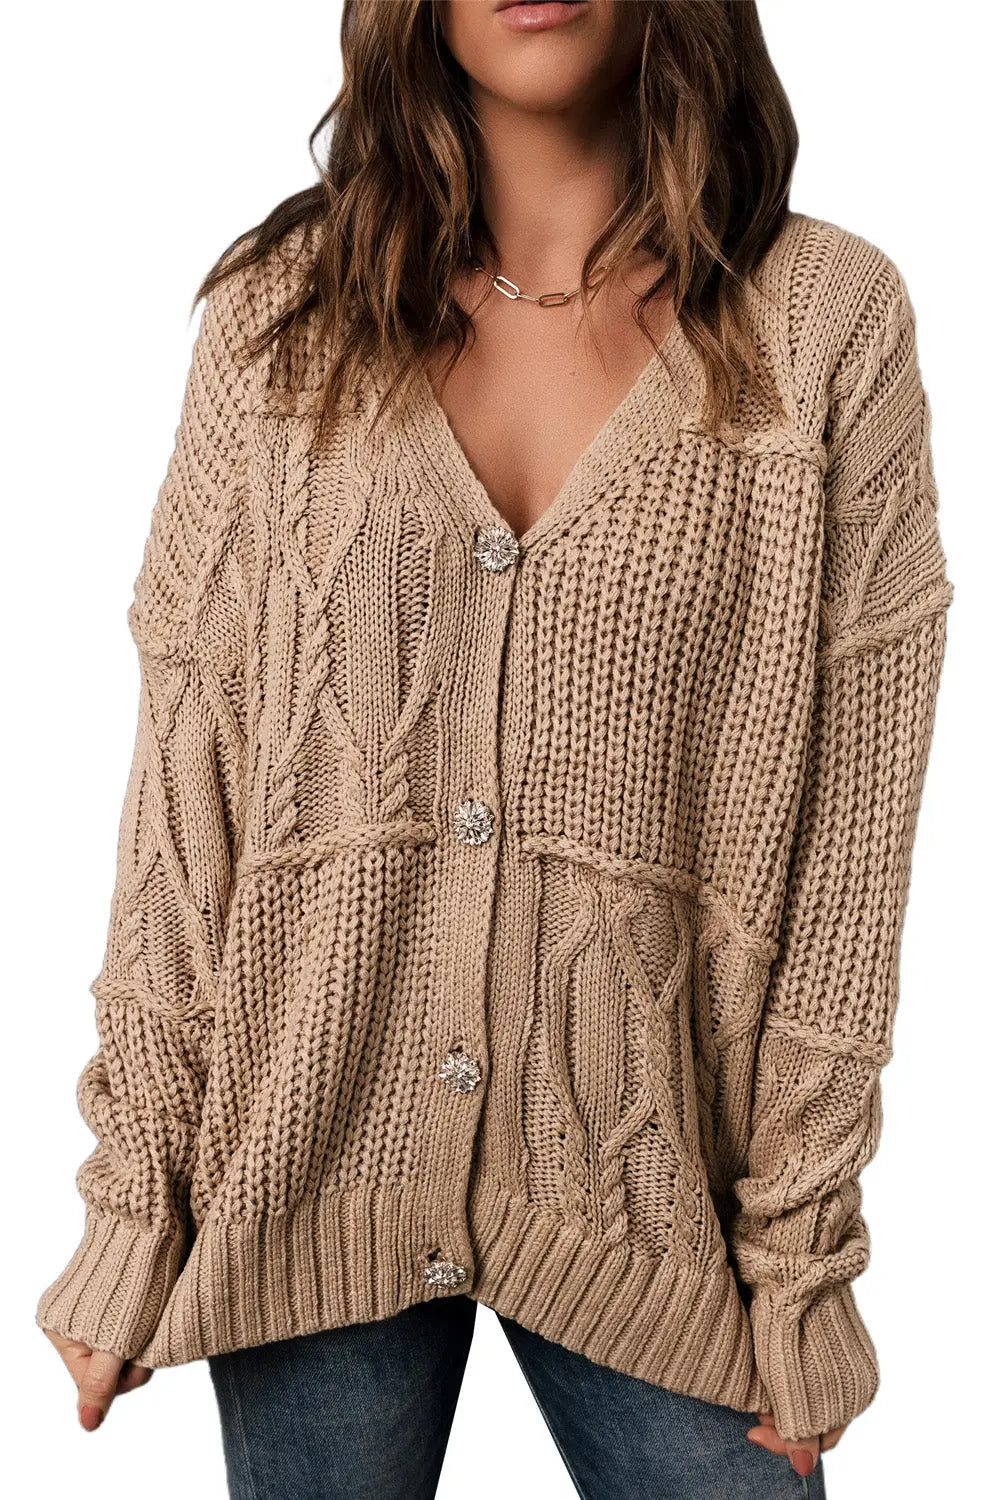 Apricot buttons front patterned texture knit cardigan - sweaters & cardigans